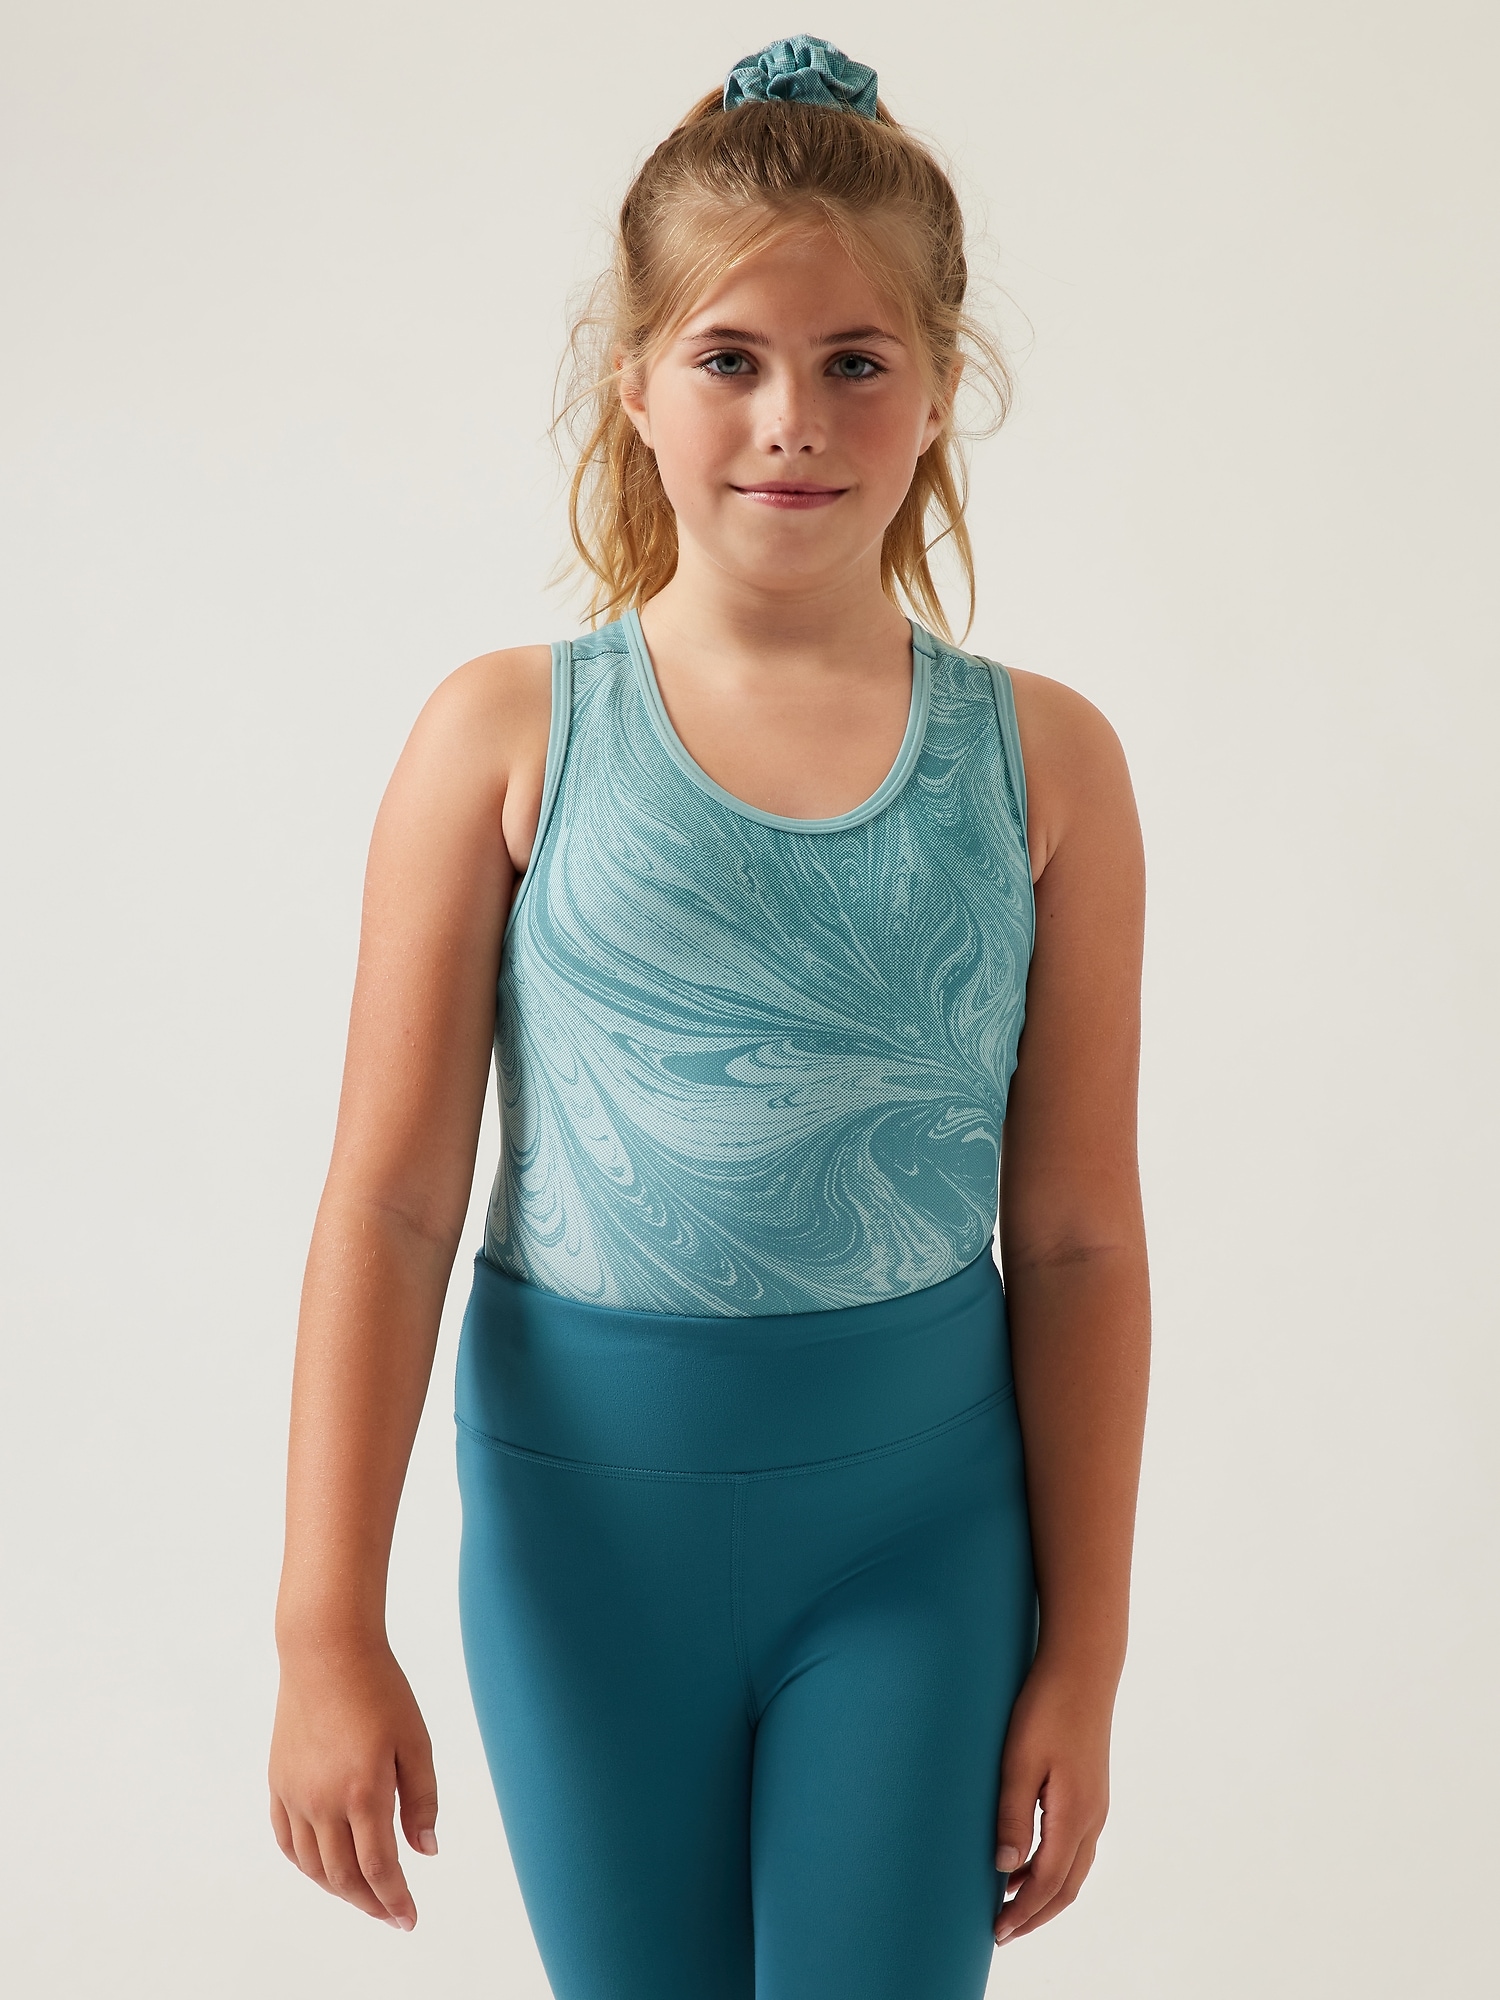 New girls gymnastic leotard metallic turquoise with silver top 